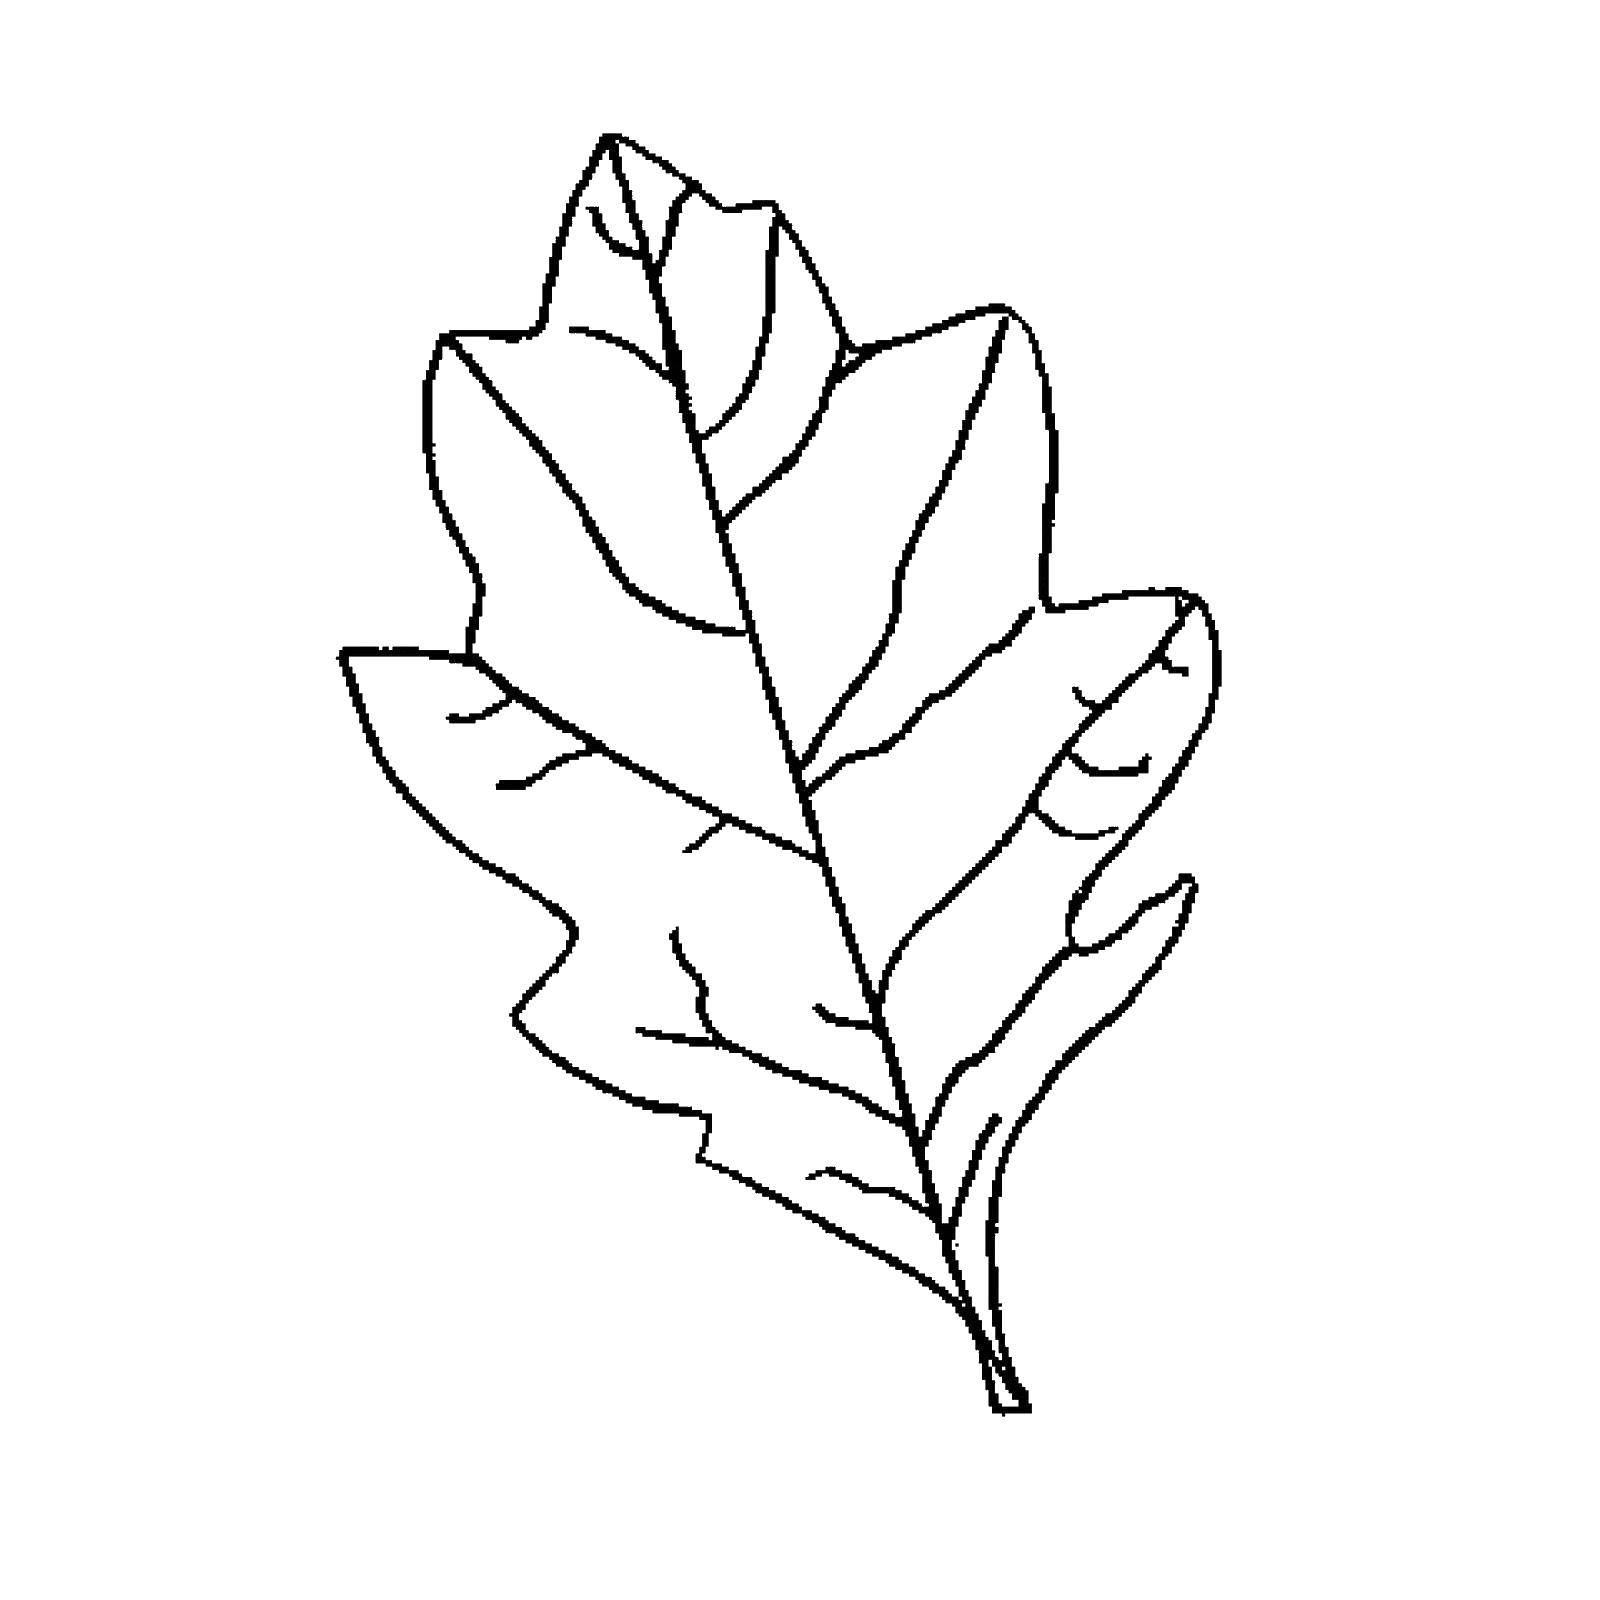 Coloring Oak leaf with veins. Category leaves. Tags:  Leaves, tree.